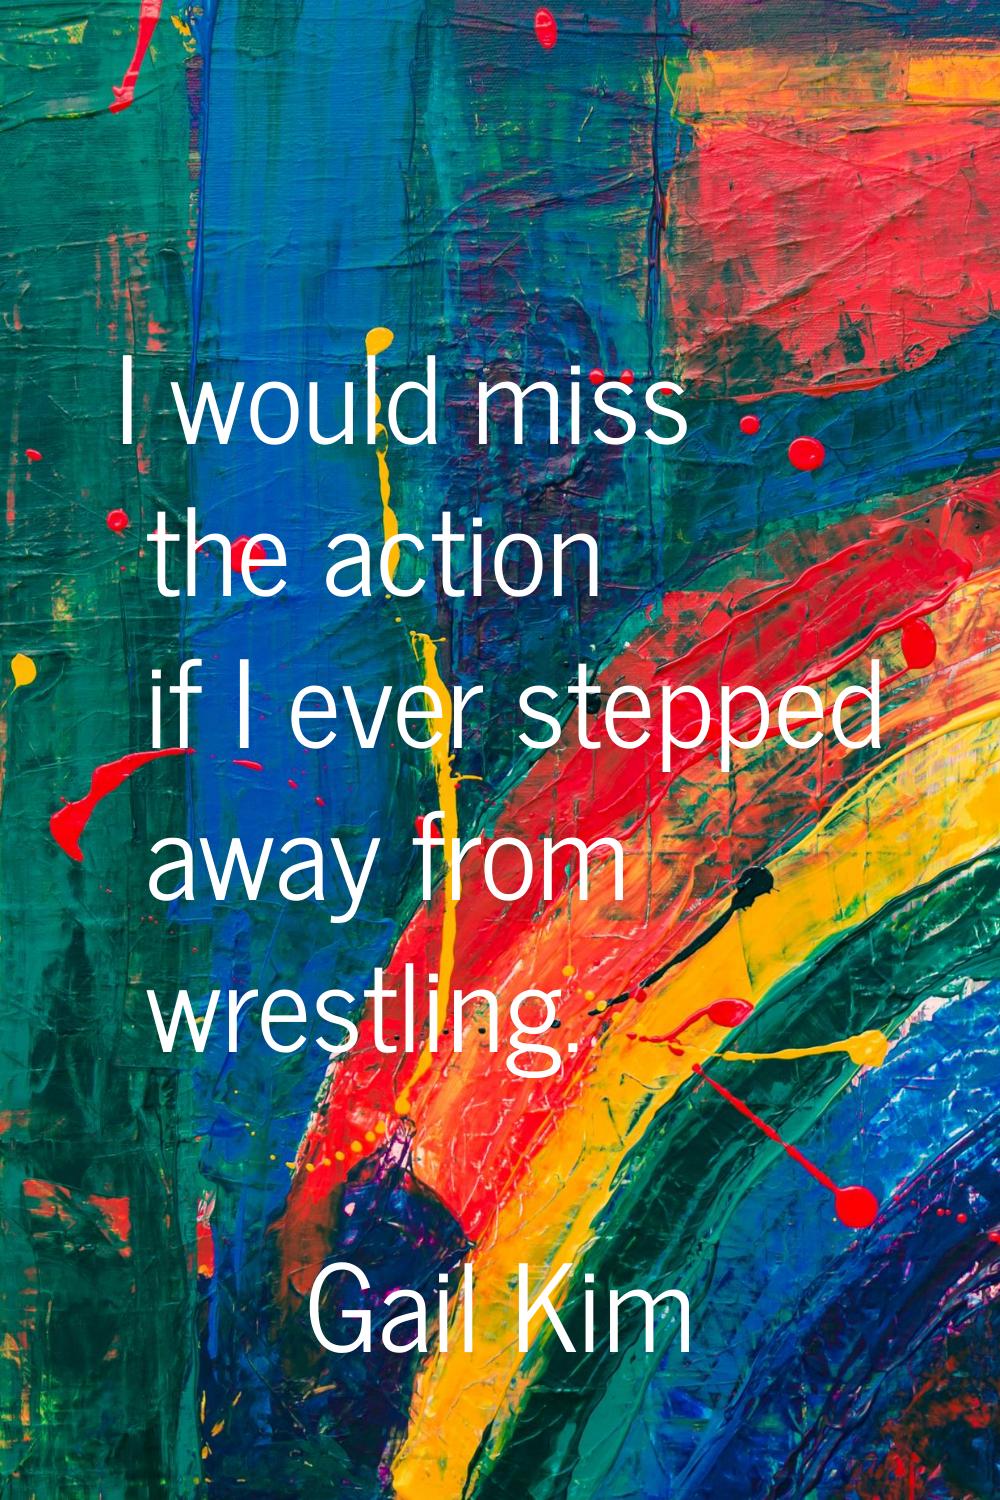 I would miss the action if I ever stepped away from wrestling.